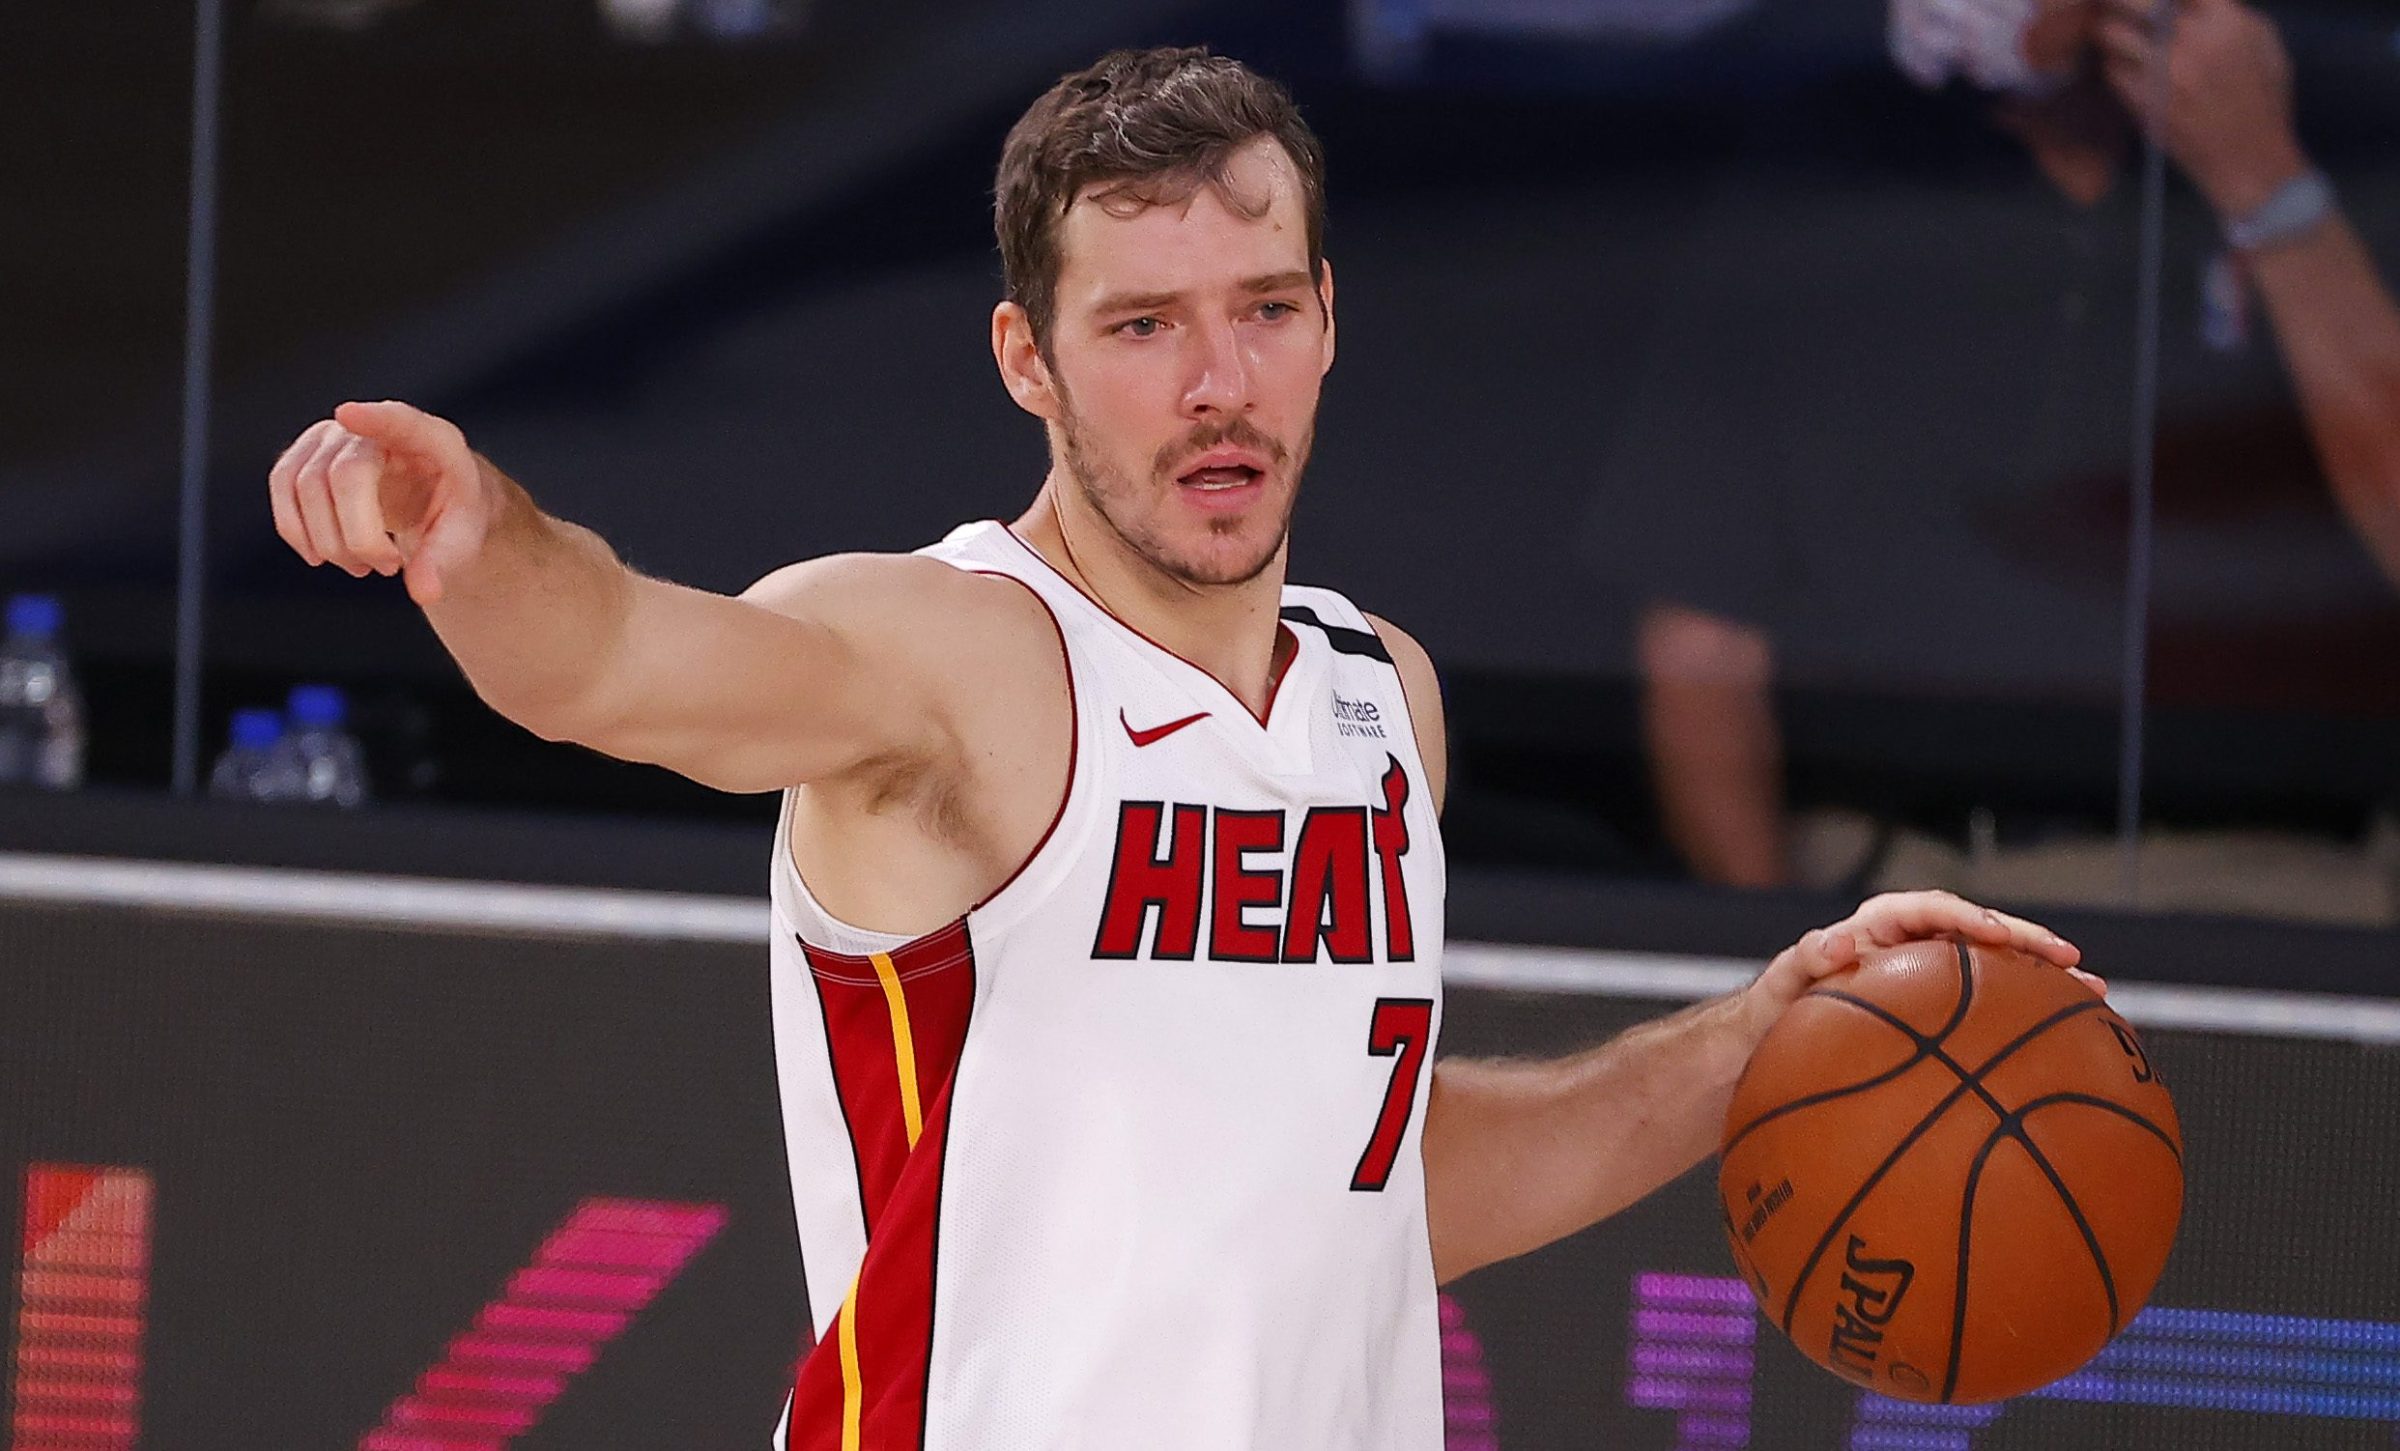 Miami Heat guard Goran Dragic handles the ball and directs the offense during a game in the NBA's Orlando bubble.